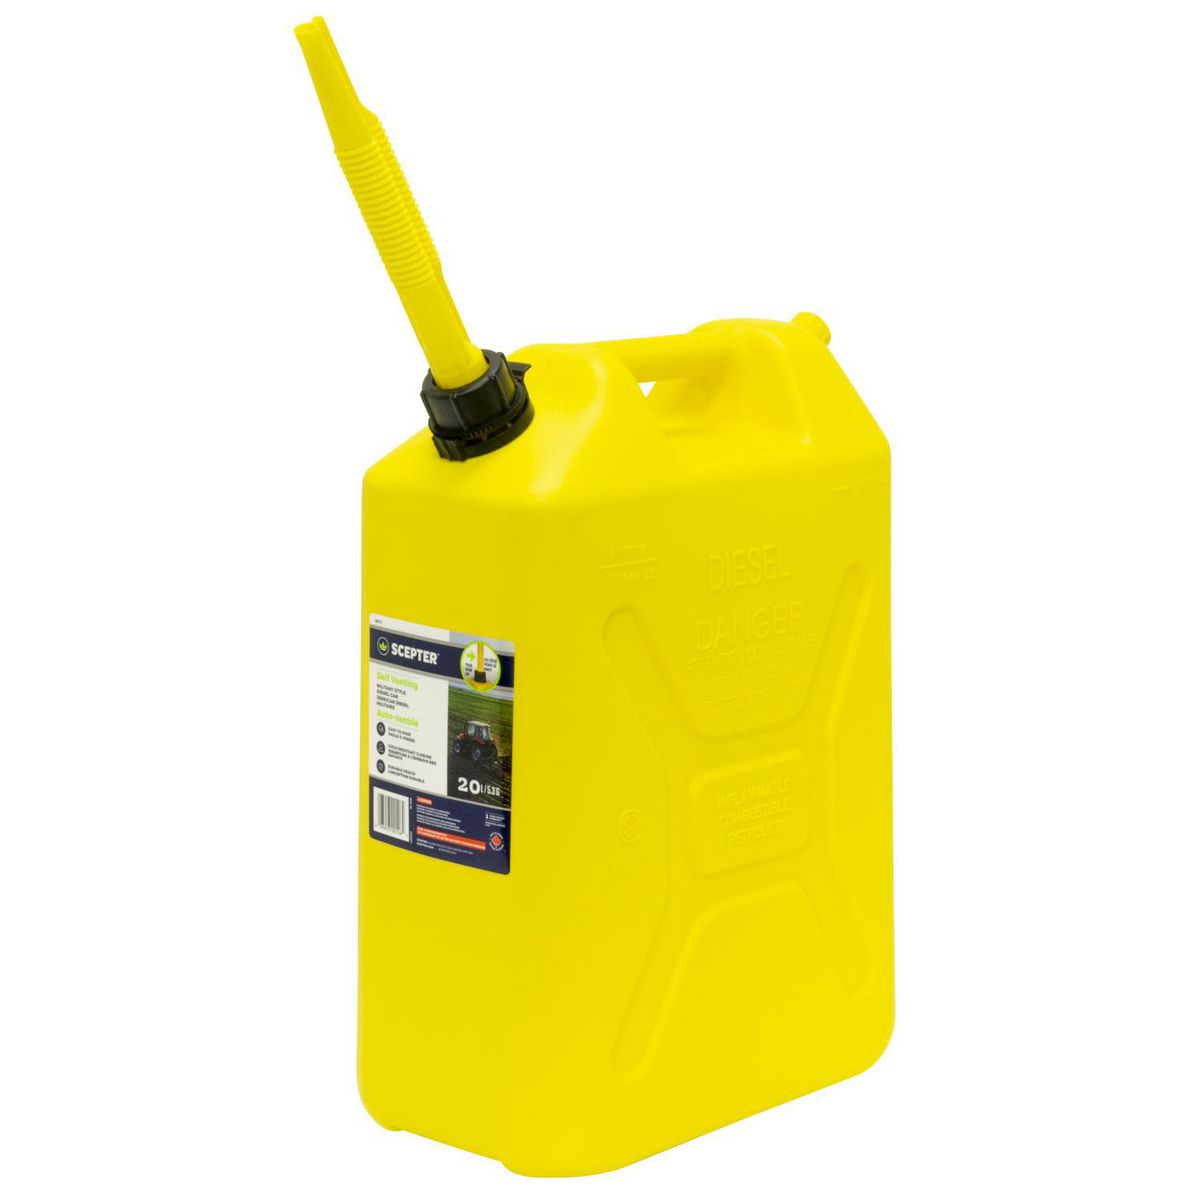 Scpeter 20L Yellow Plastic Diesel Fuel Jerry Can